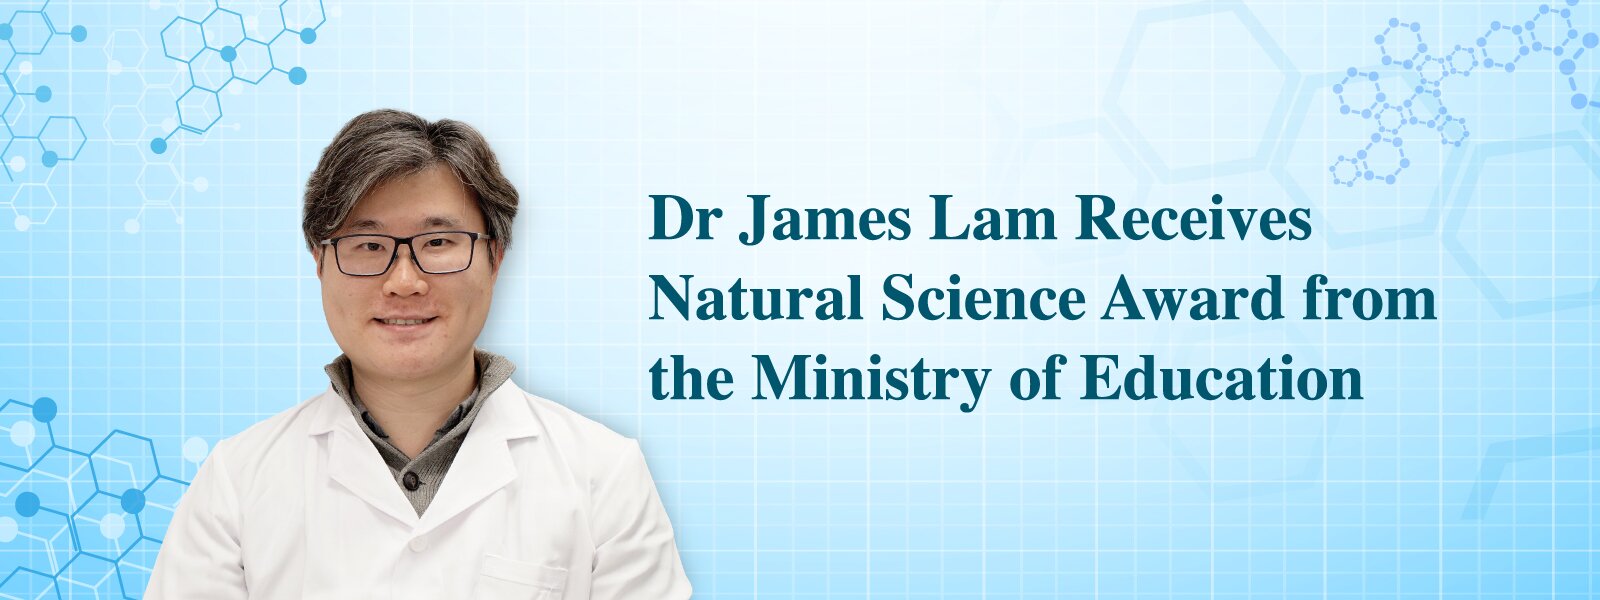 Dr James Lam Receives Natural Science Award from the Ministry of Education